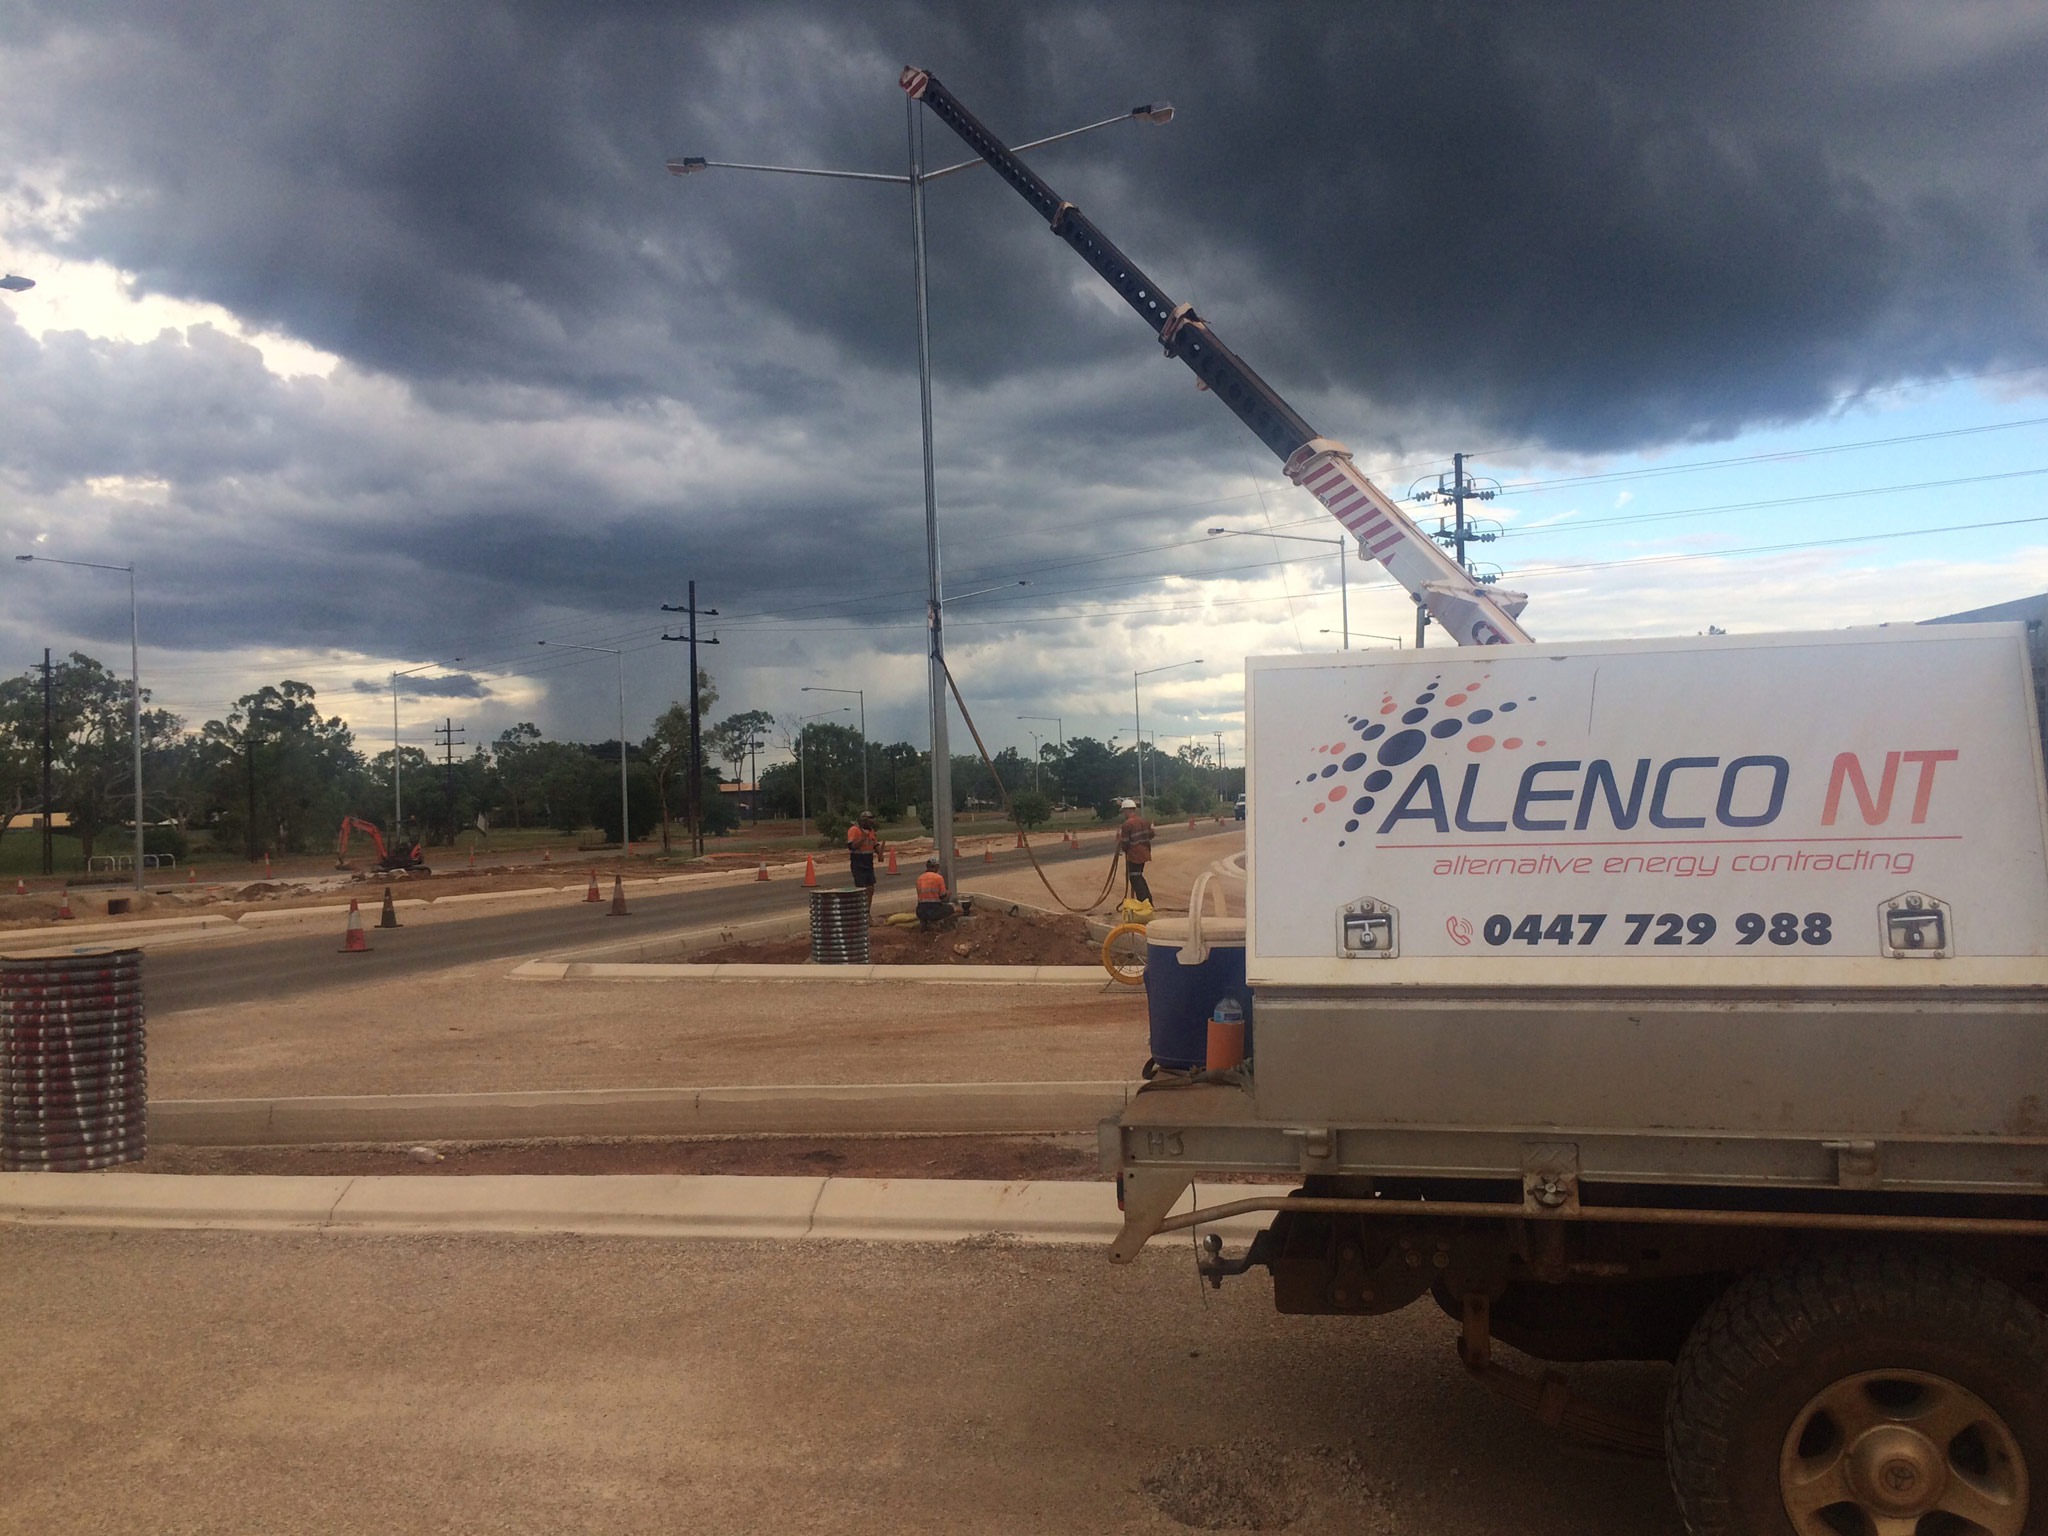 Roads and truck — Energy Contracting in Yarrawonga, NT